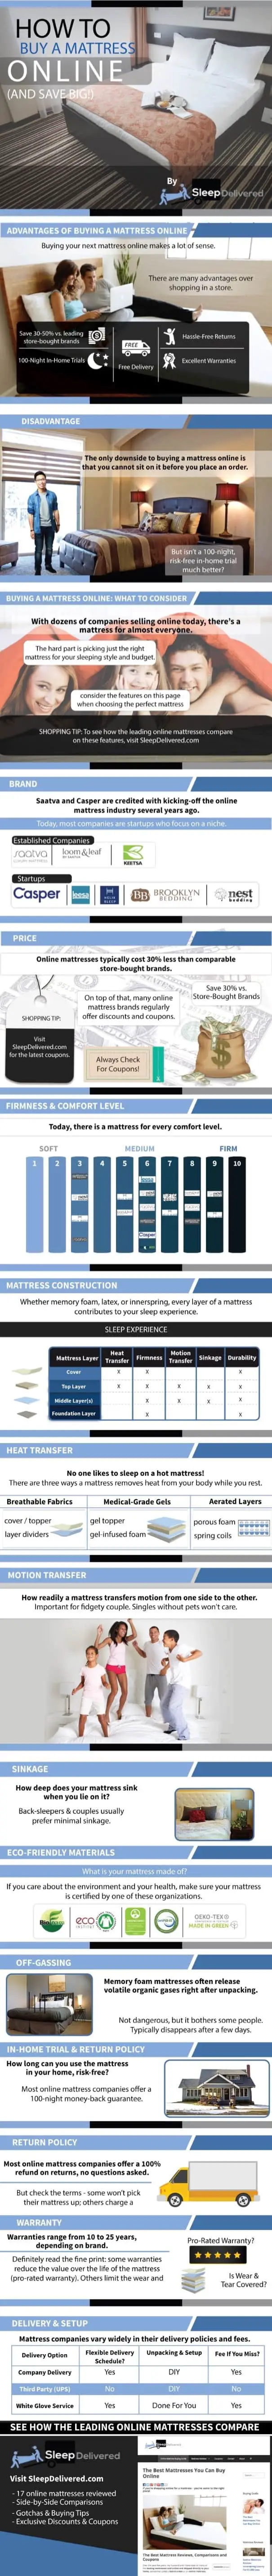 How To Buy a Mattress Online and Save BIG (Infographic)